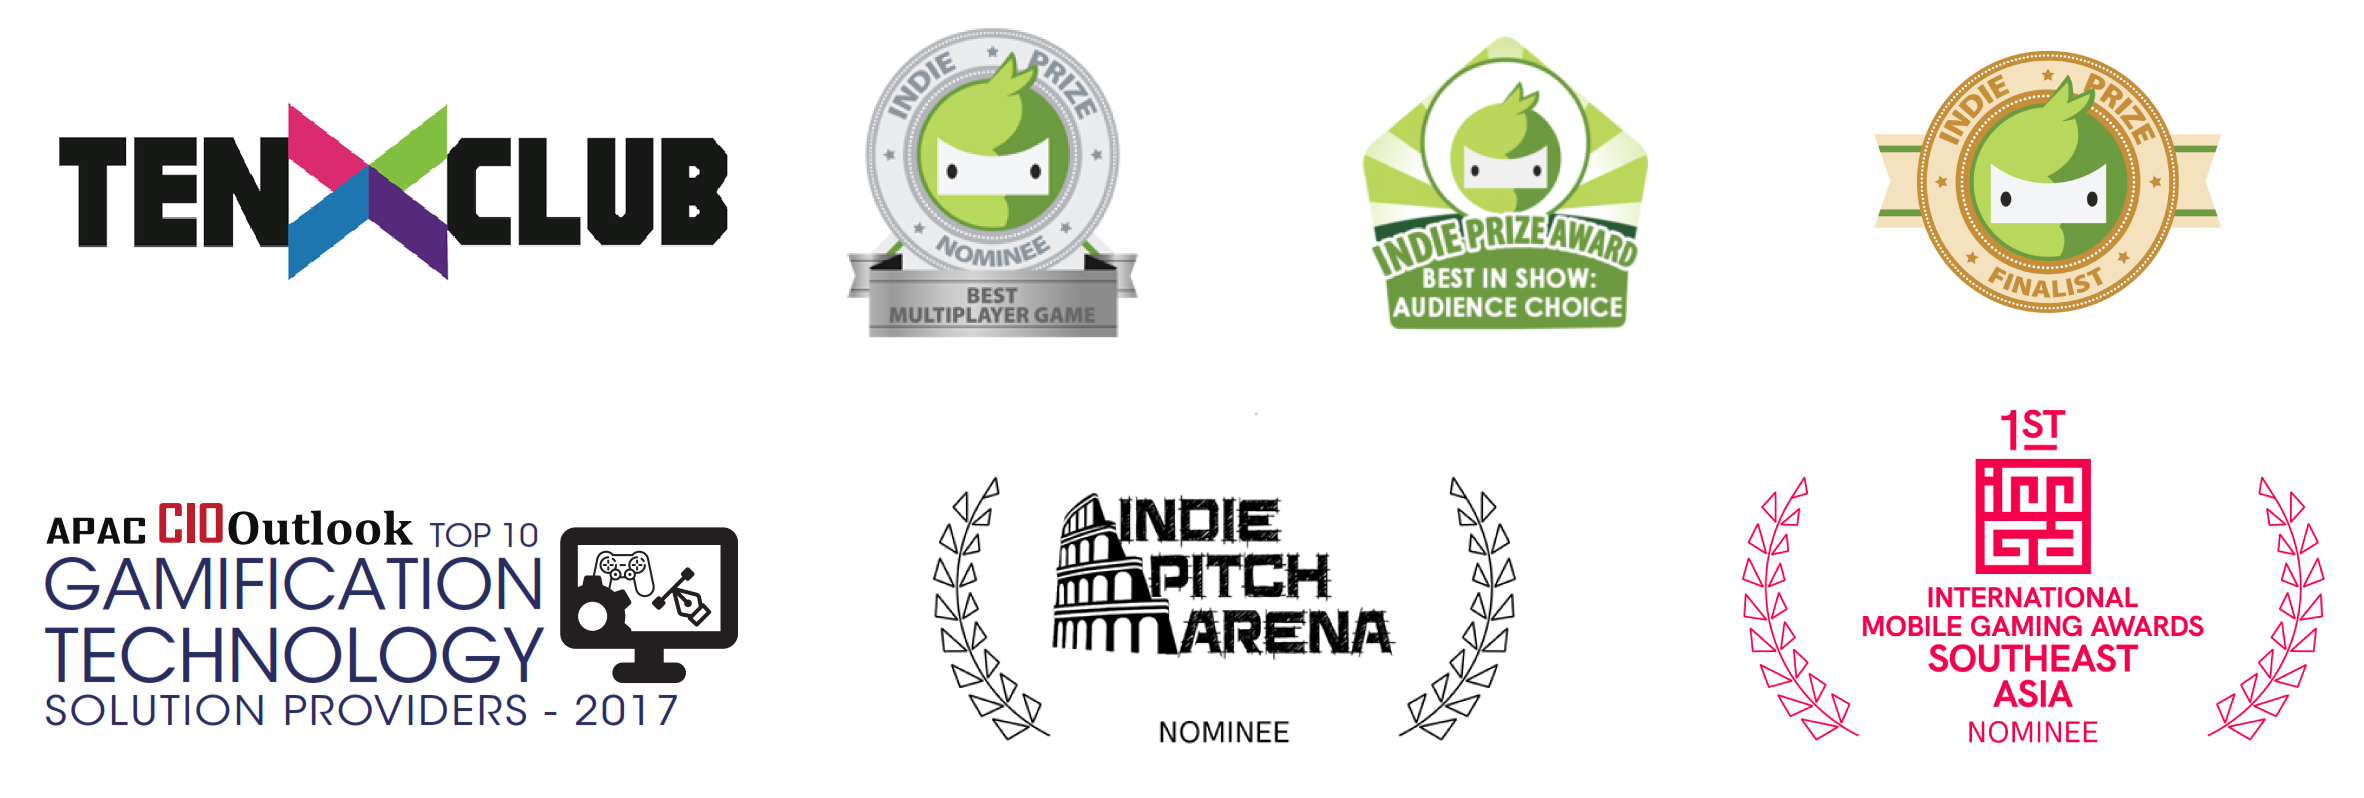 Awards Logo "TenxClub, Indie Prize, APAC CIO Outlook Top 10 Gamification technology provier, Indie Pitch Arena, 1st IMGA SEA Nominee"